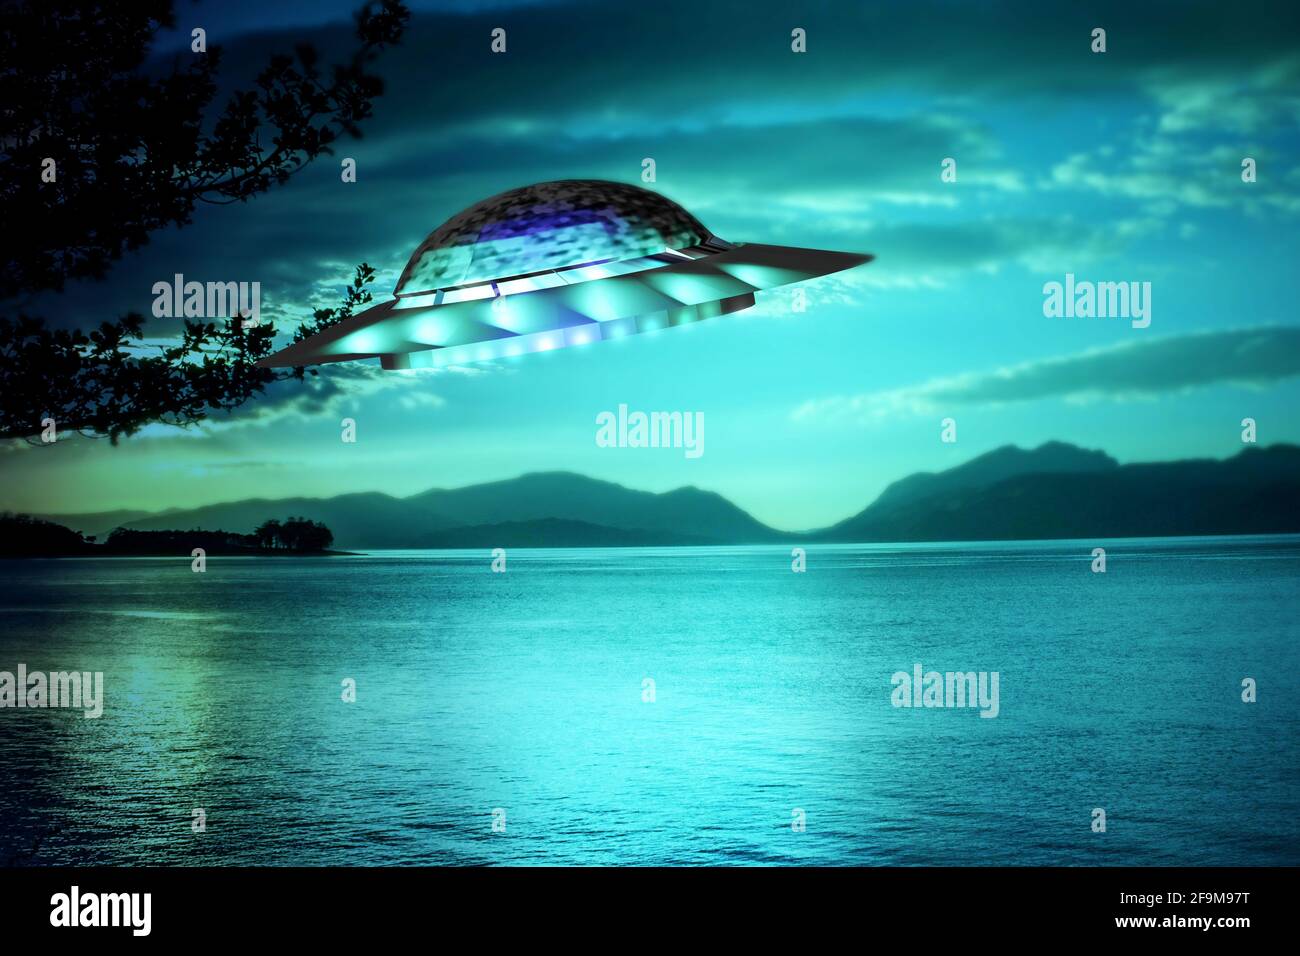 UFO. Unidentified flying object in the night. Stock Photo